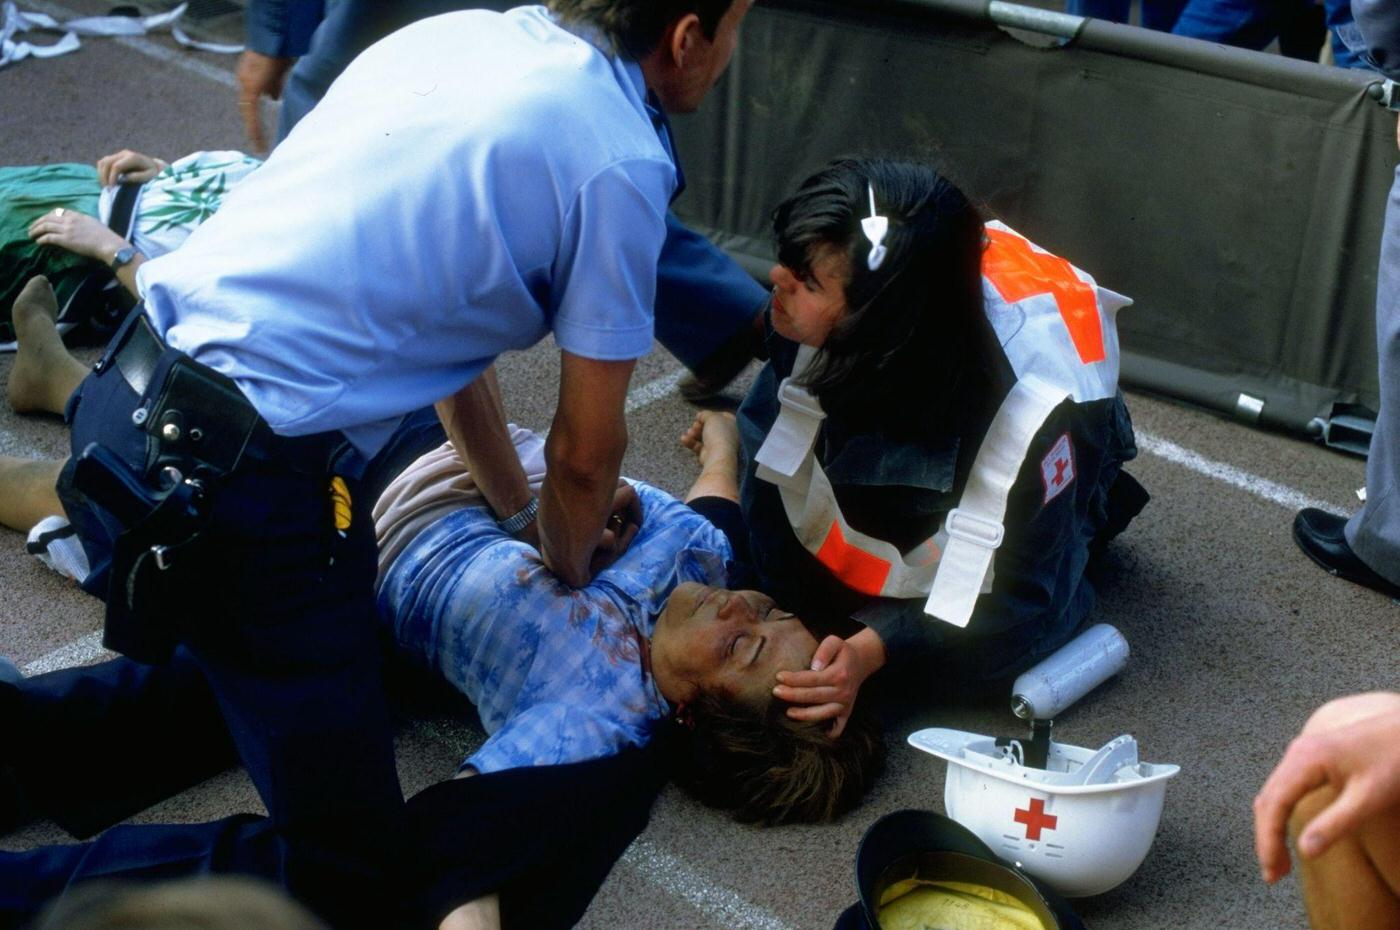 Supporter receives first aid during crowd riots at Heysel Stadium, European Cup Final, 1985.